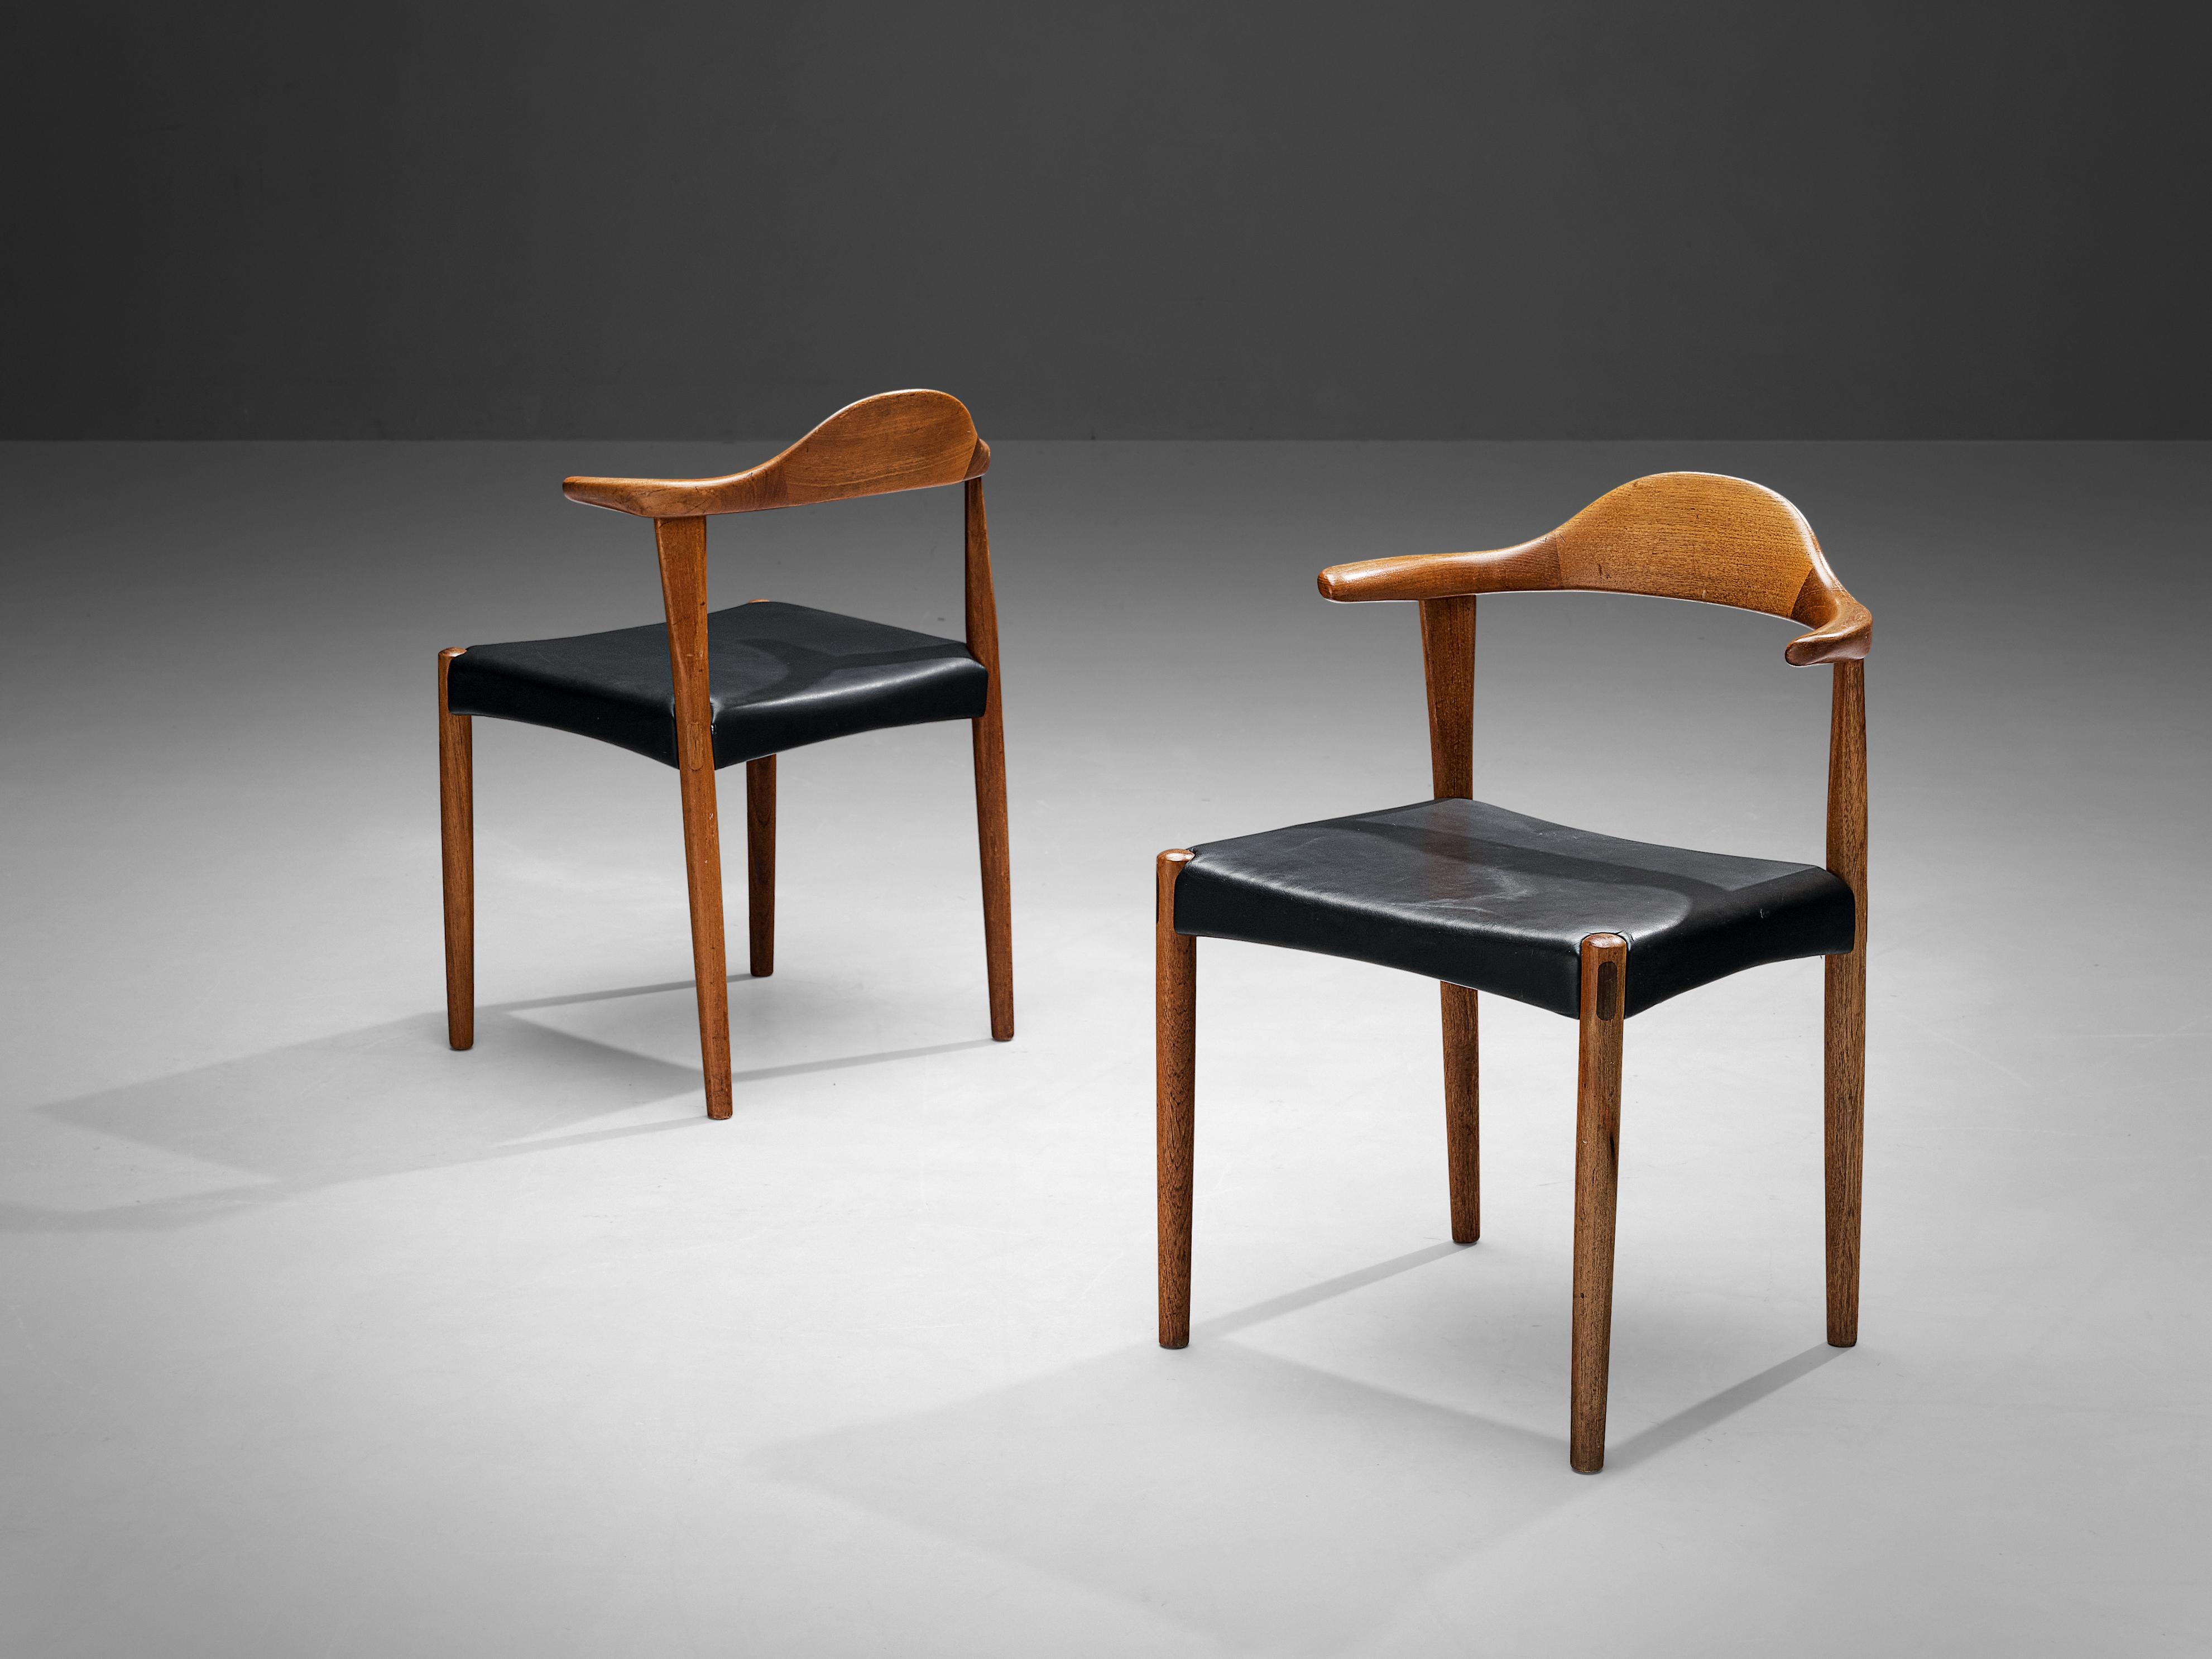 Harry Østergaard for Randers Møbelfabrik, 'Bull Horn' chairs, teak, leatherette, 1950s

This pair of teak dining chairs is designed by Harry Østergaard for Randers Møbelfabrik in the 1950s. This design with its iconic 'Bull Horn' armrests.